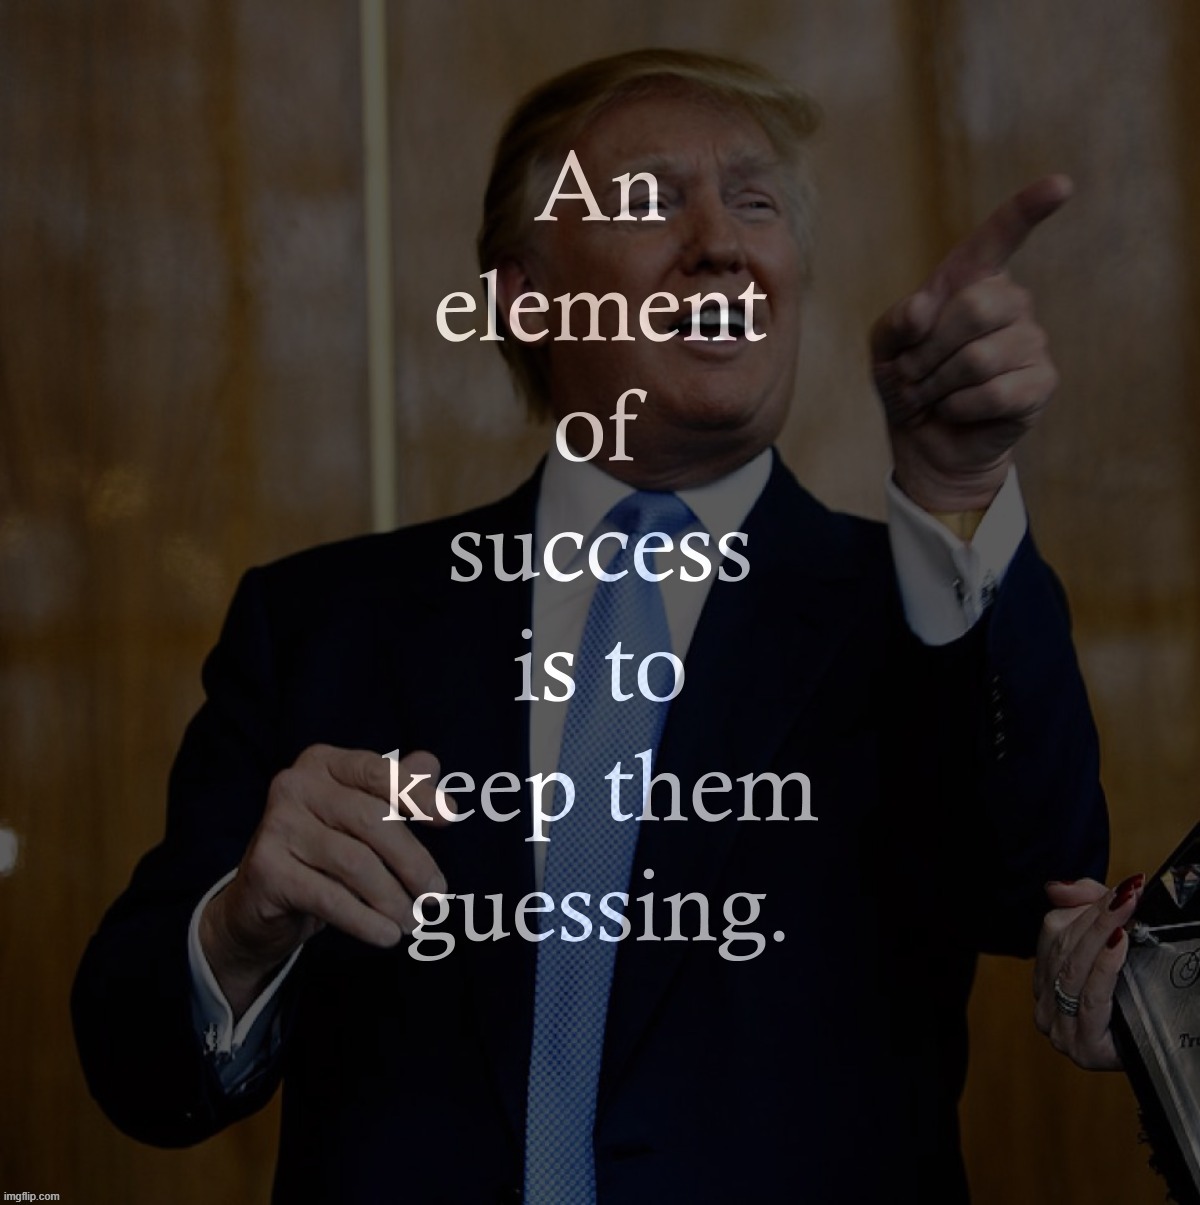 Words of wisdom. Thank you, President Trump. | image tagged in trump an element of success,hustle,hustle hard,words of wisdom,donald trump,success | made w/ Imgflip meme maker